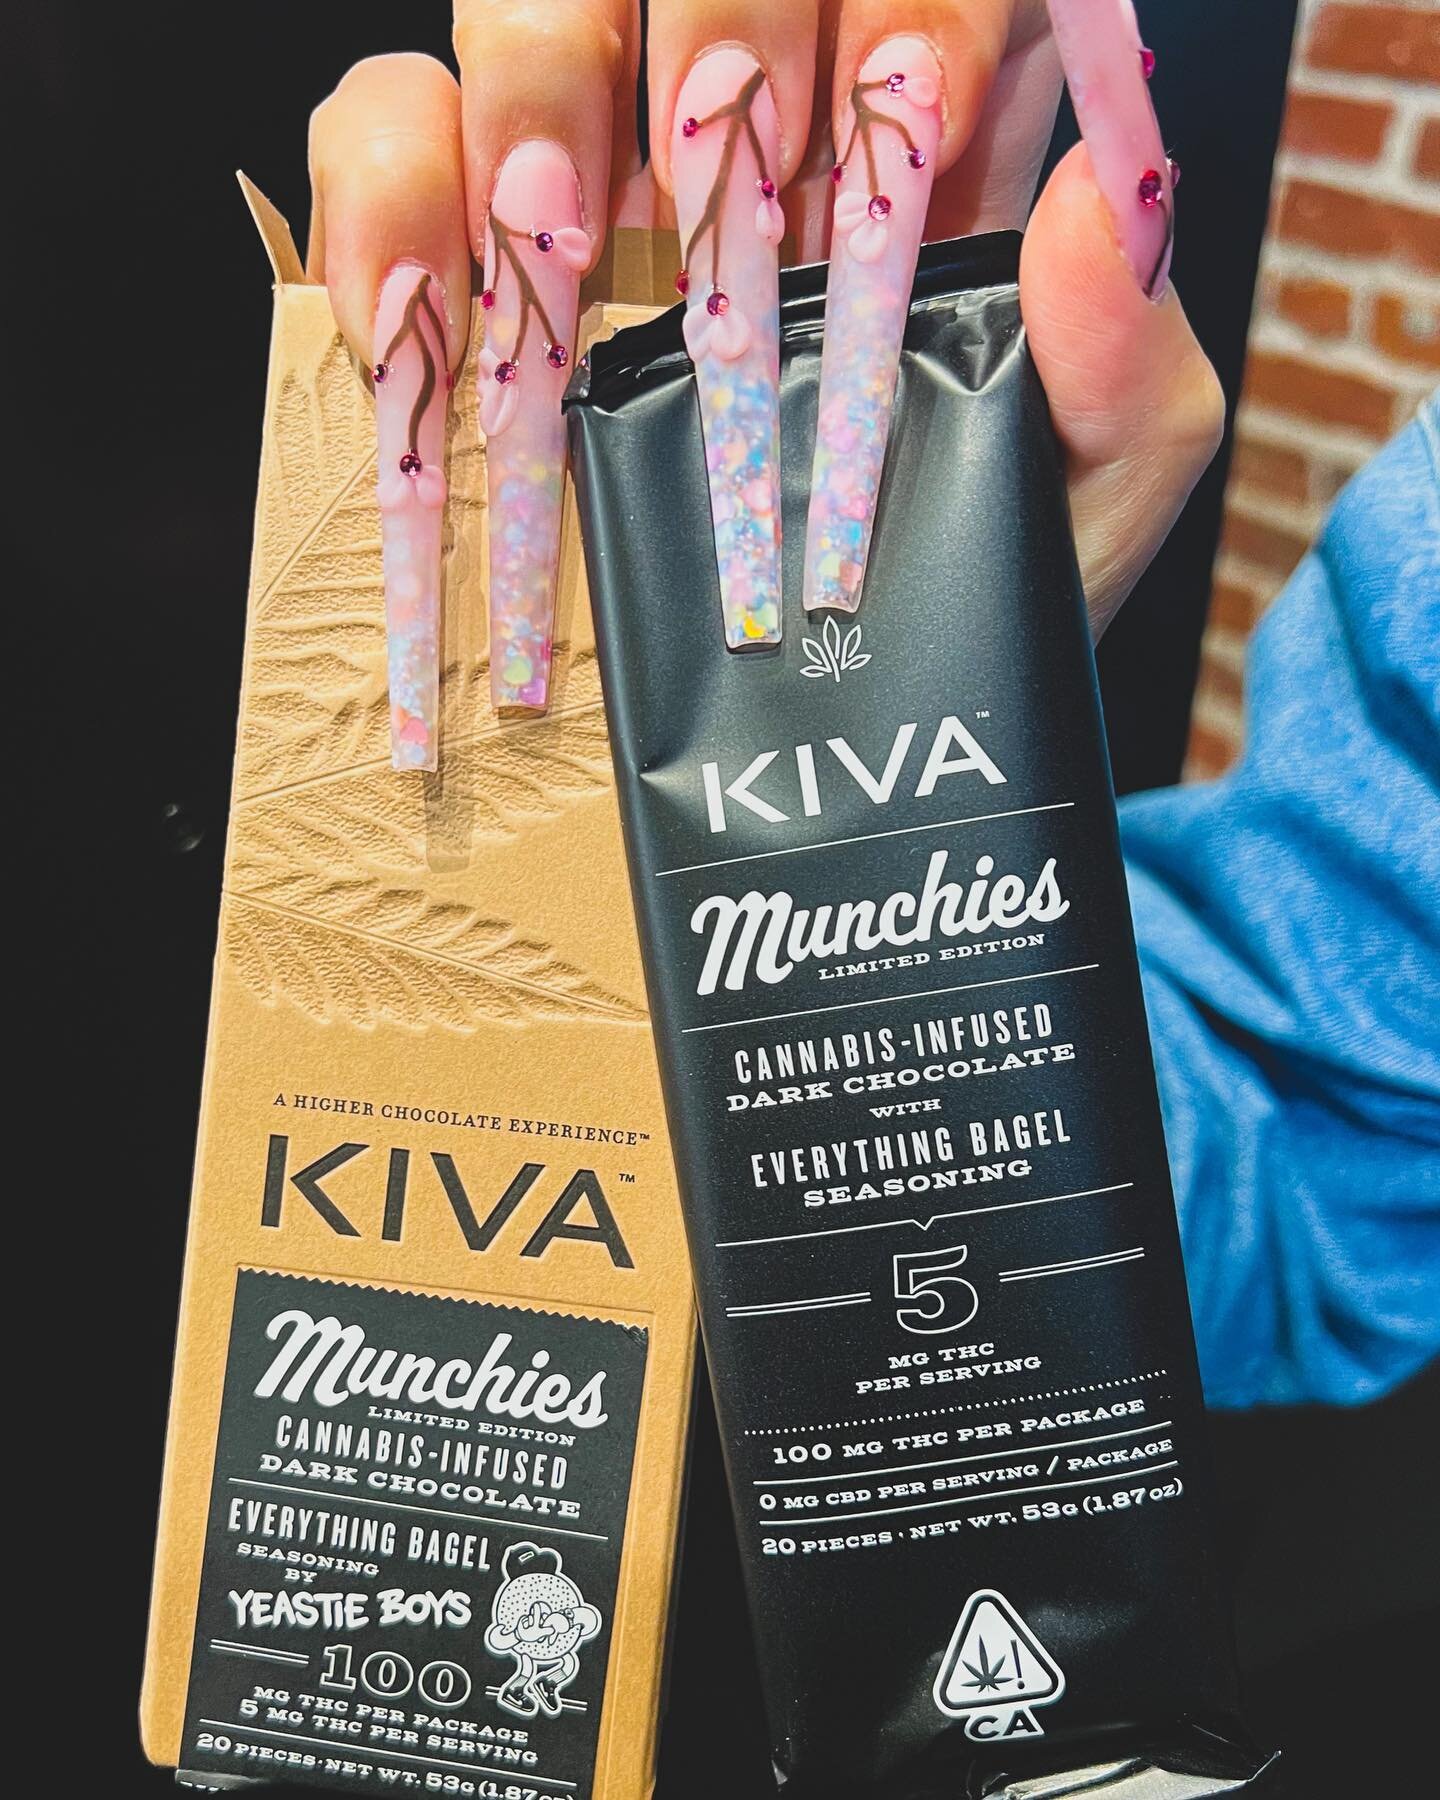 Happy Spring everyone! 🌸🌺💐🌷
You know what's perfect with your breakfast? @madebykiva MUNCHIES dark chocolate bar that collabs with @yeastieboysbagels to bring you the perfect breakfast snack to eat before you start your day! Come through to the s